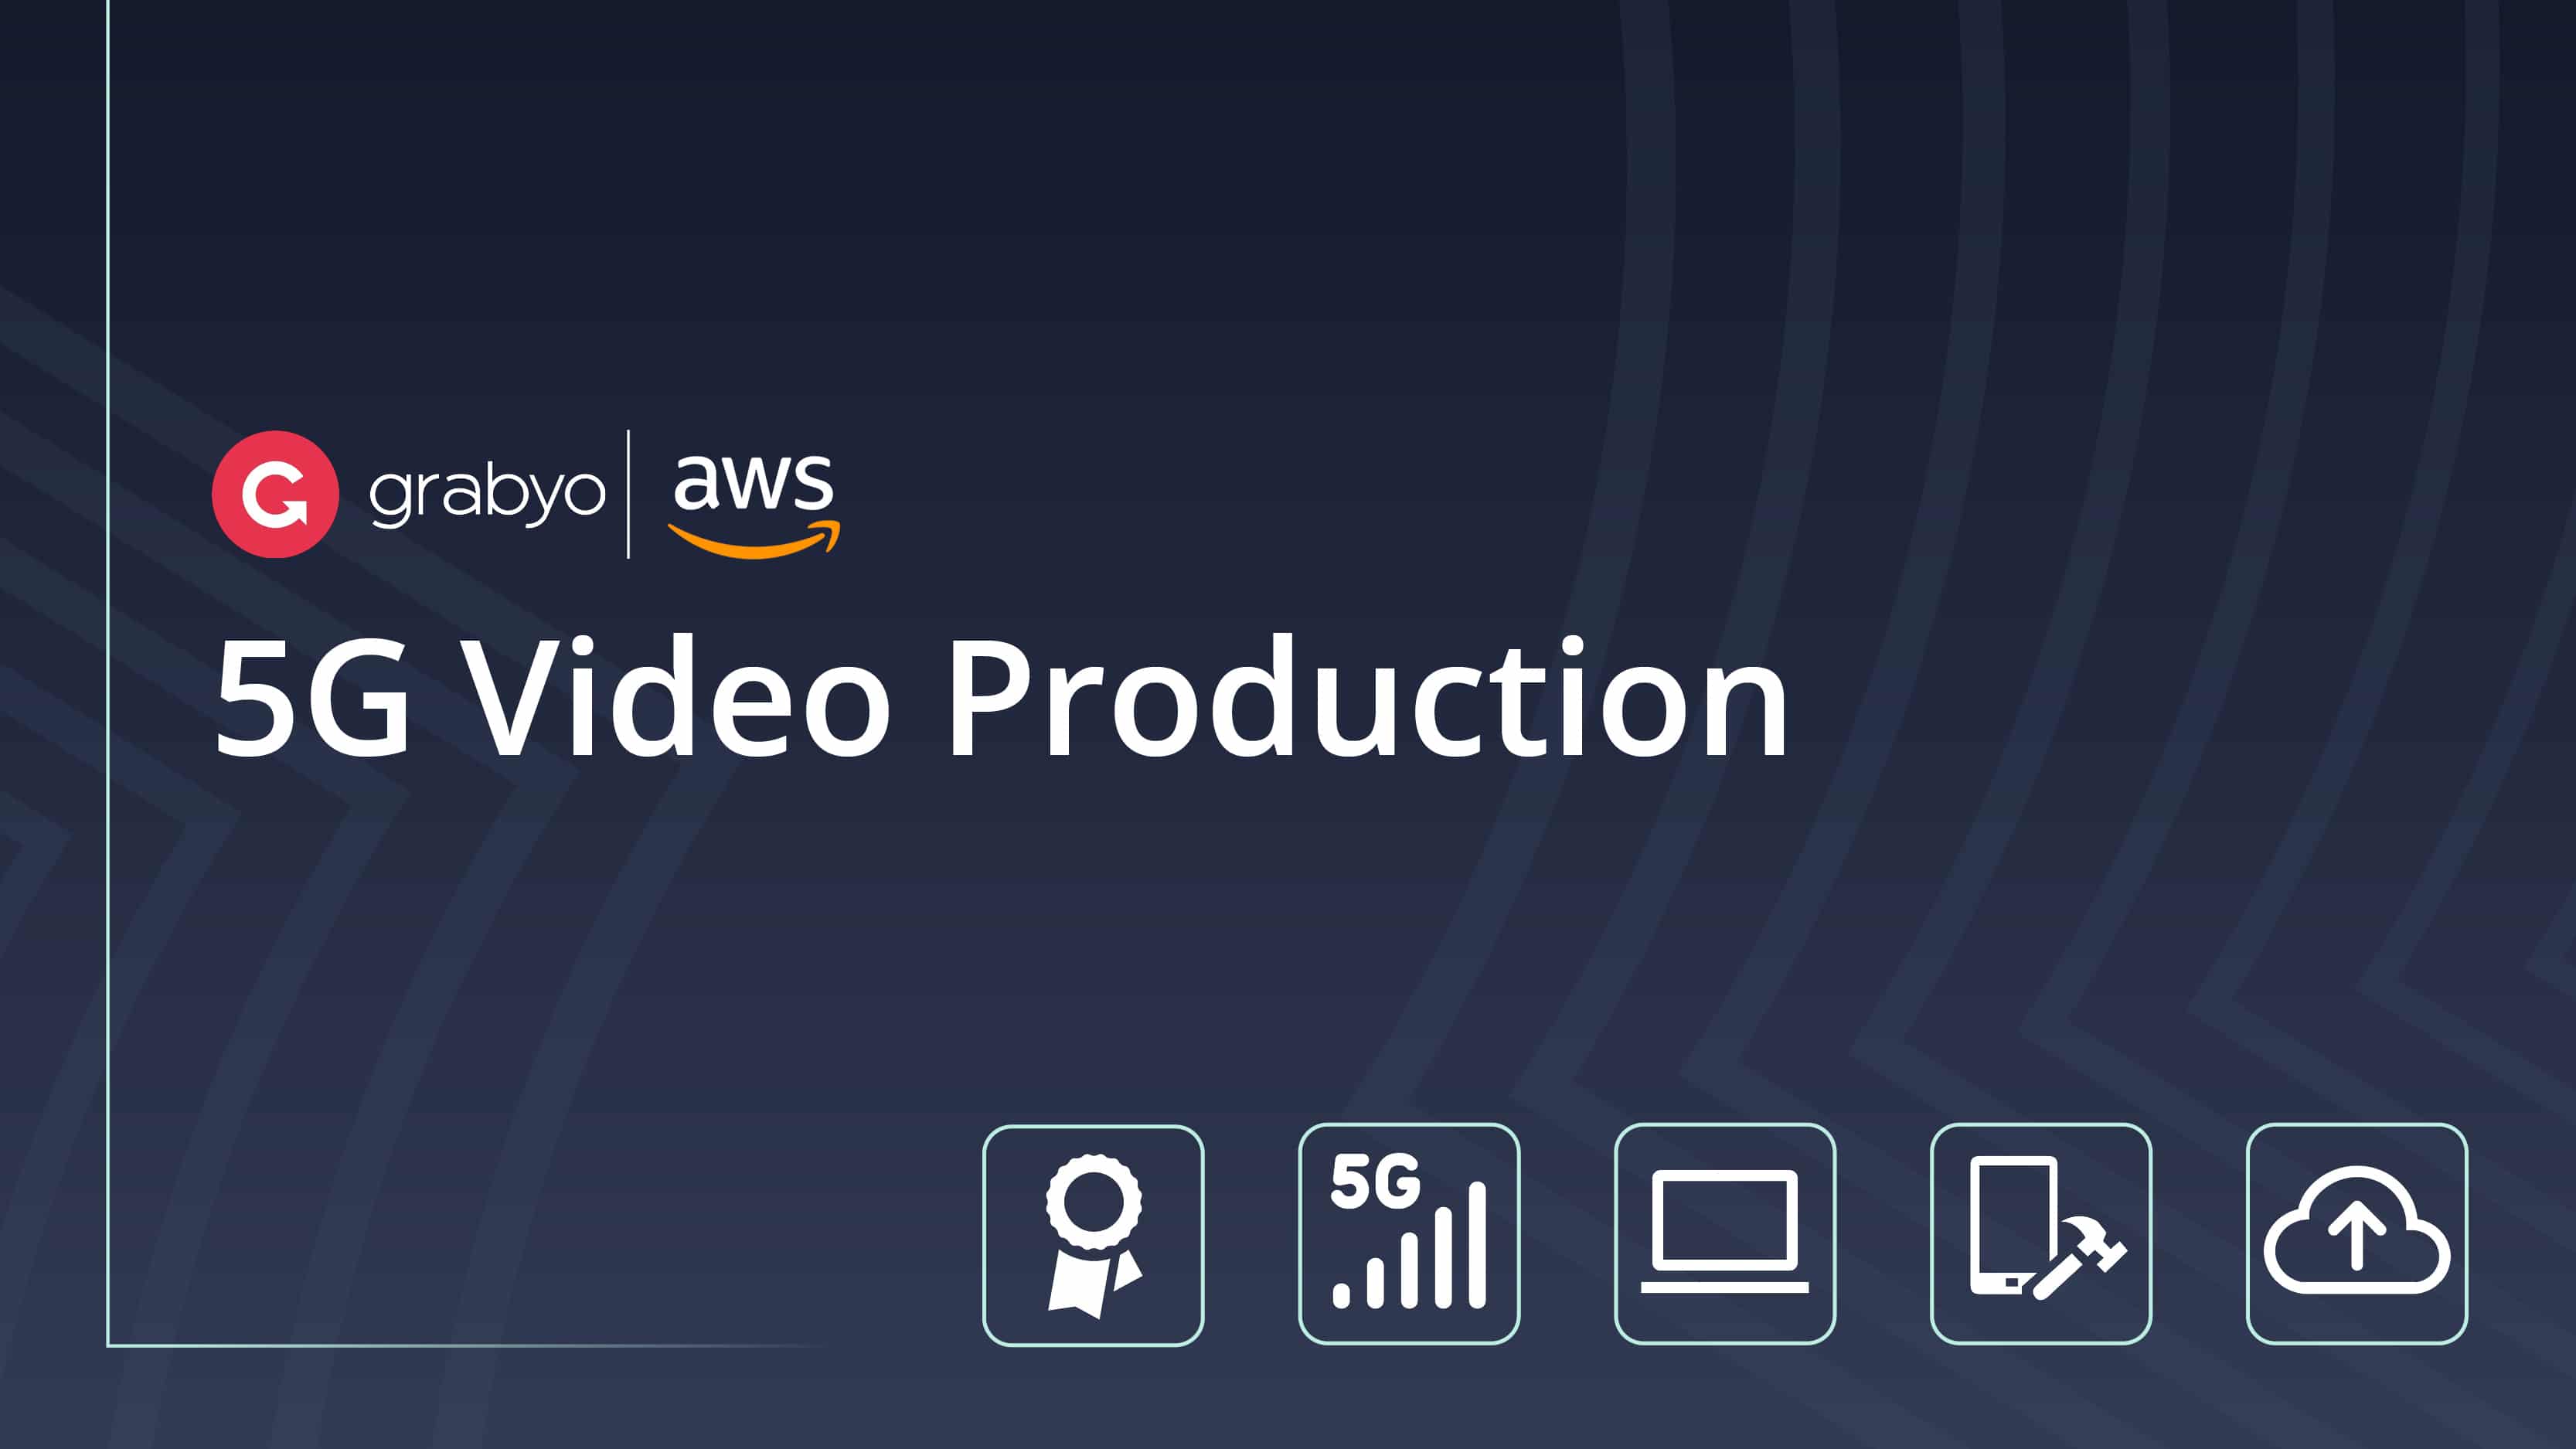 5G Production: Grabyo uses AWS to power remote live production